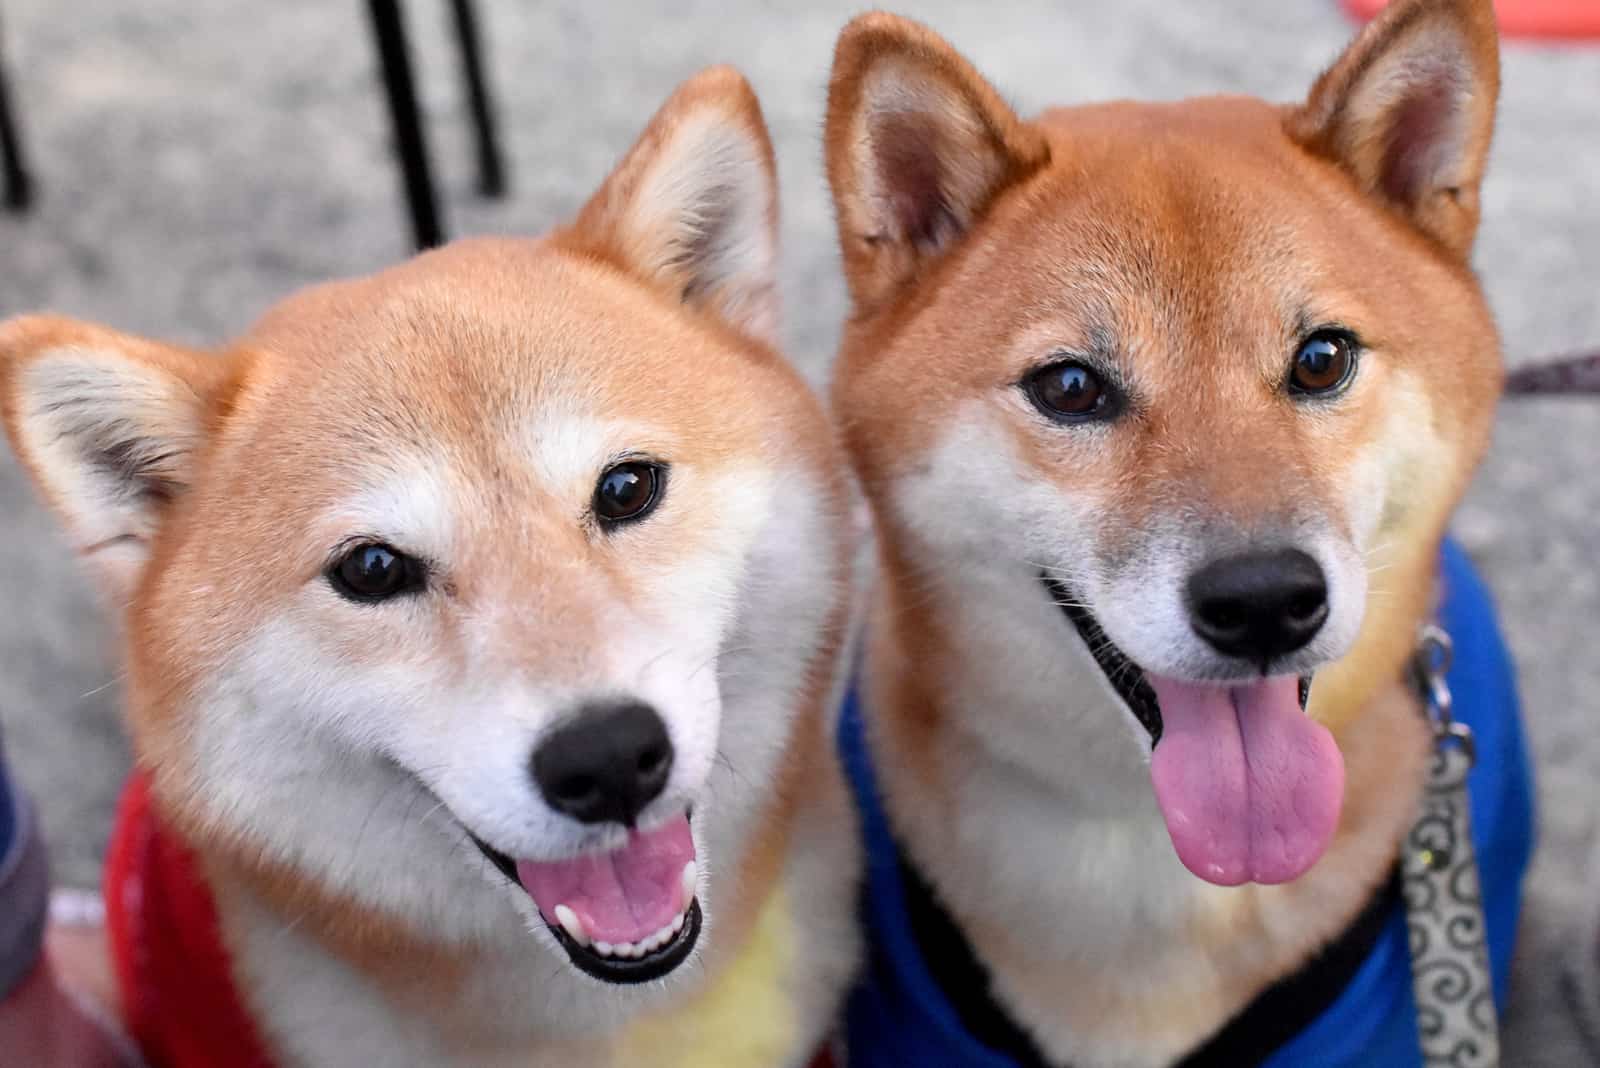 Two beautiful shiba inu dogs with tongues out